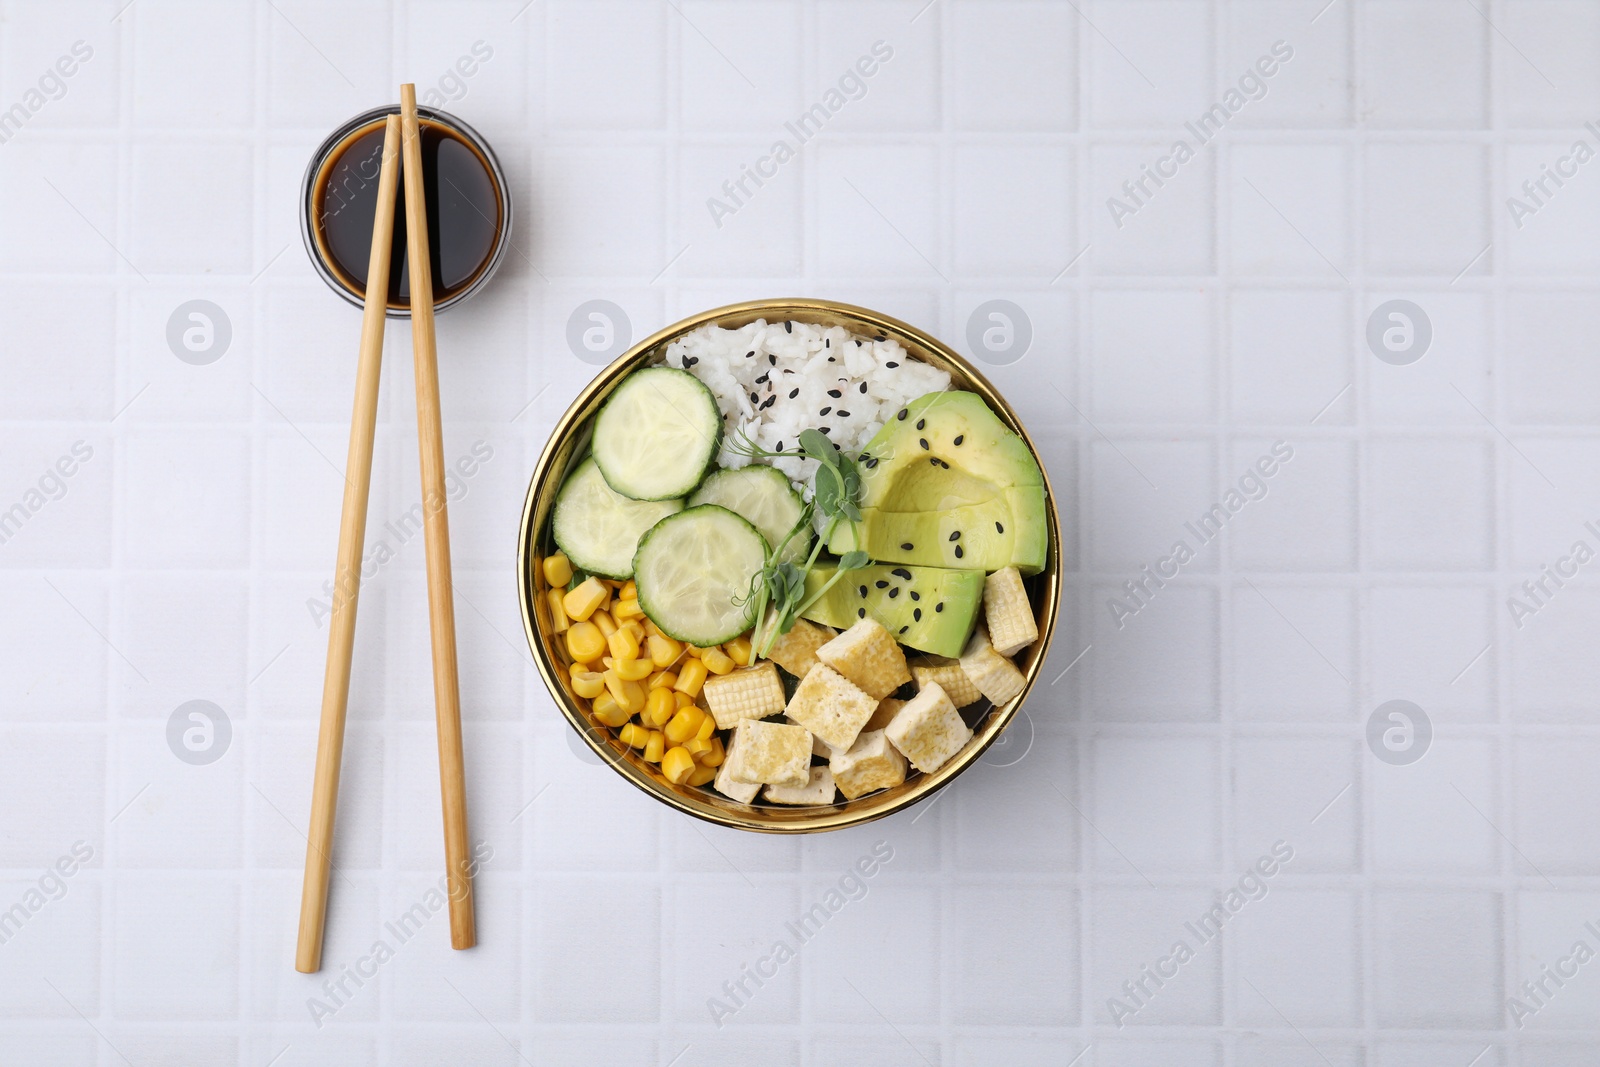 Photo of Delicious poke bowl with vegetables, tofu, avocado and microgreens served on white tiled table, flat lay